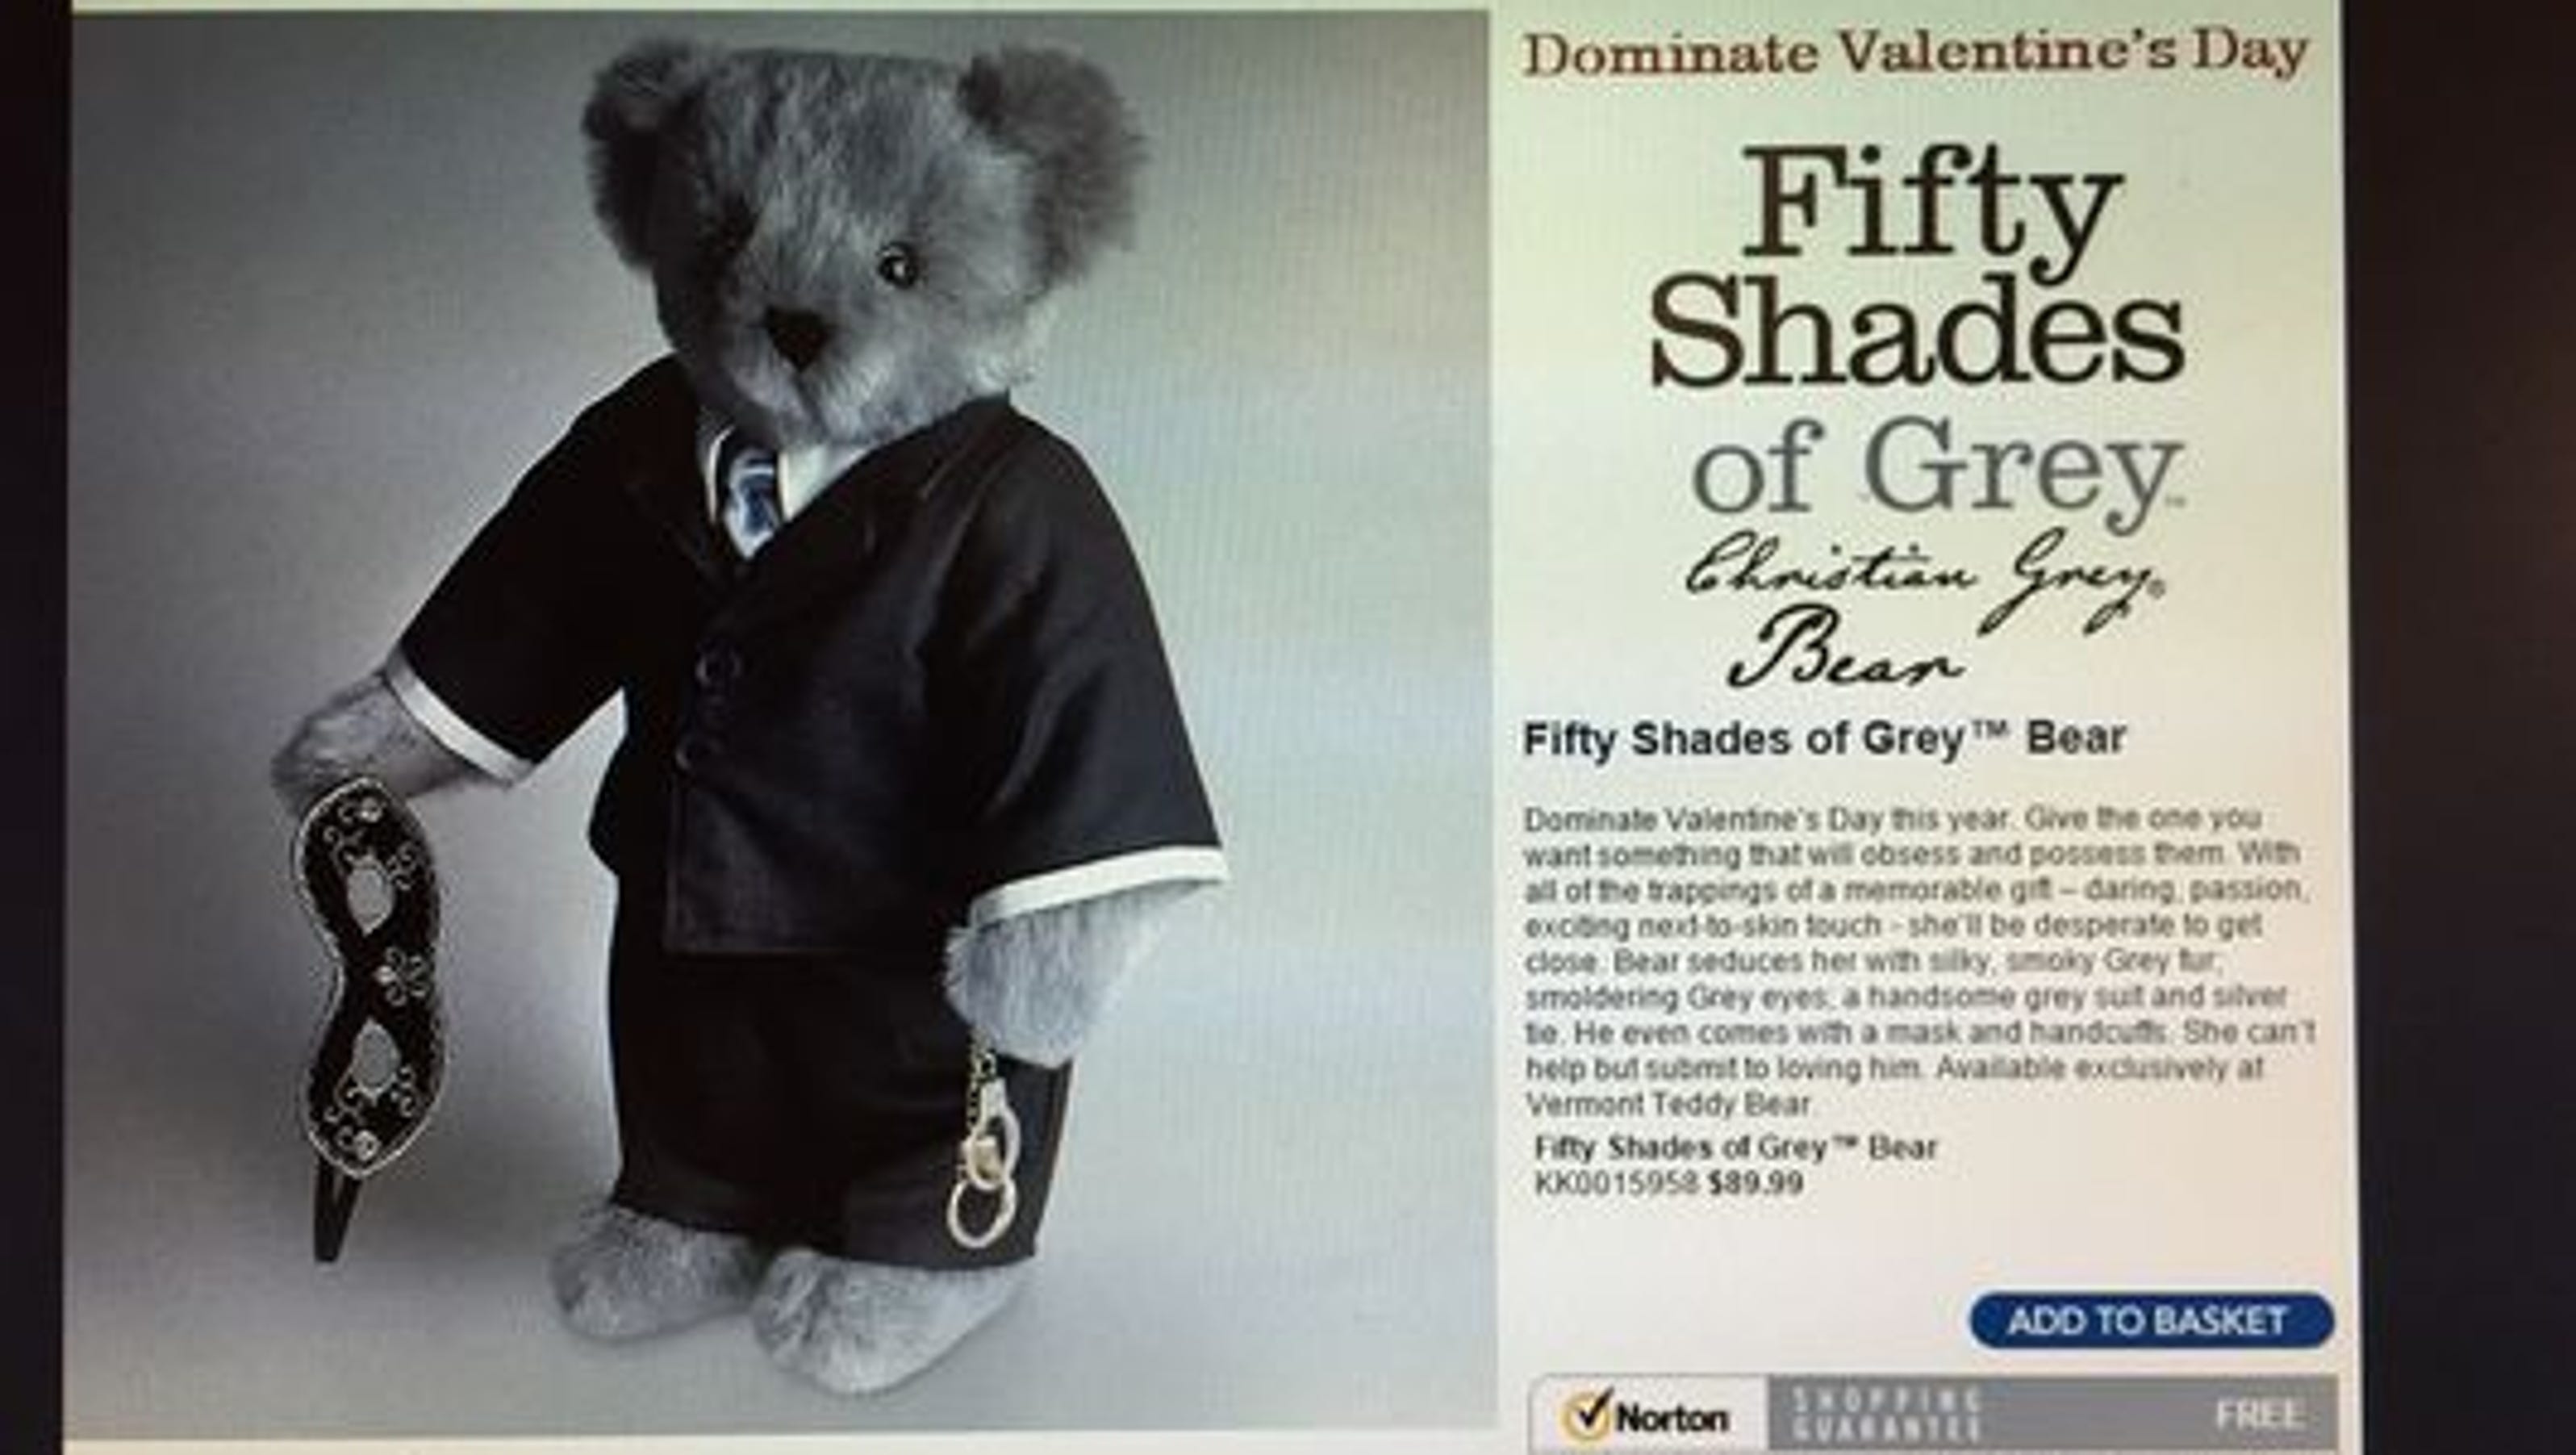 'Fifty Shades of Grey' bear wants to 'dominate' V-Day3200 x 1800